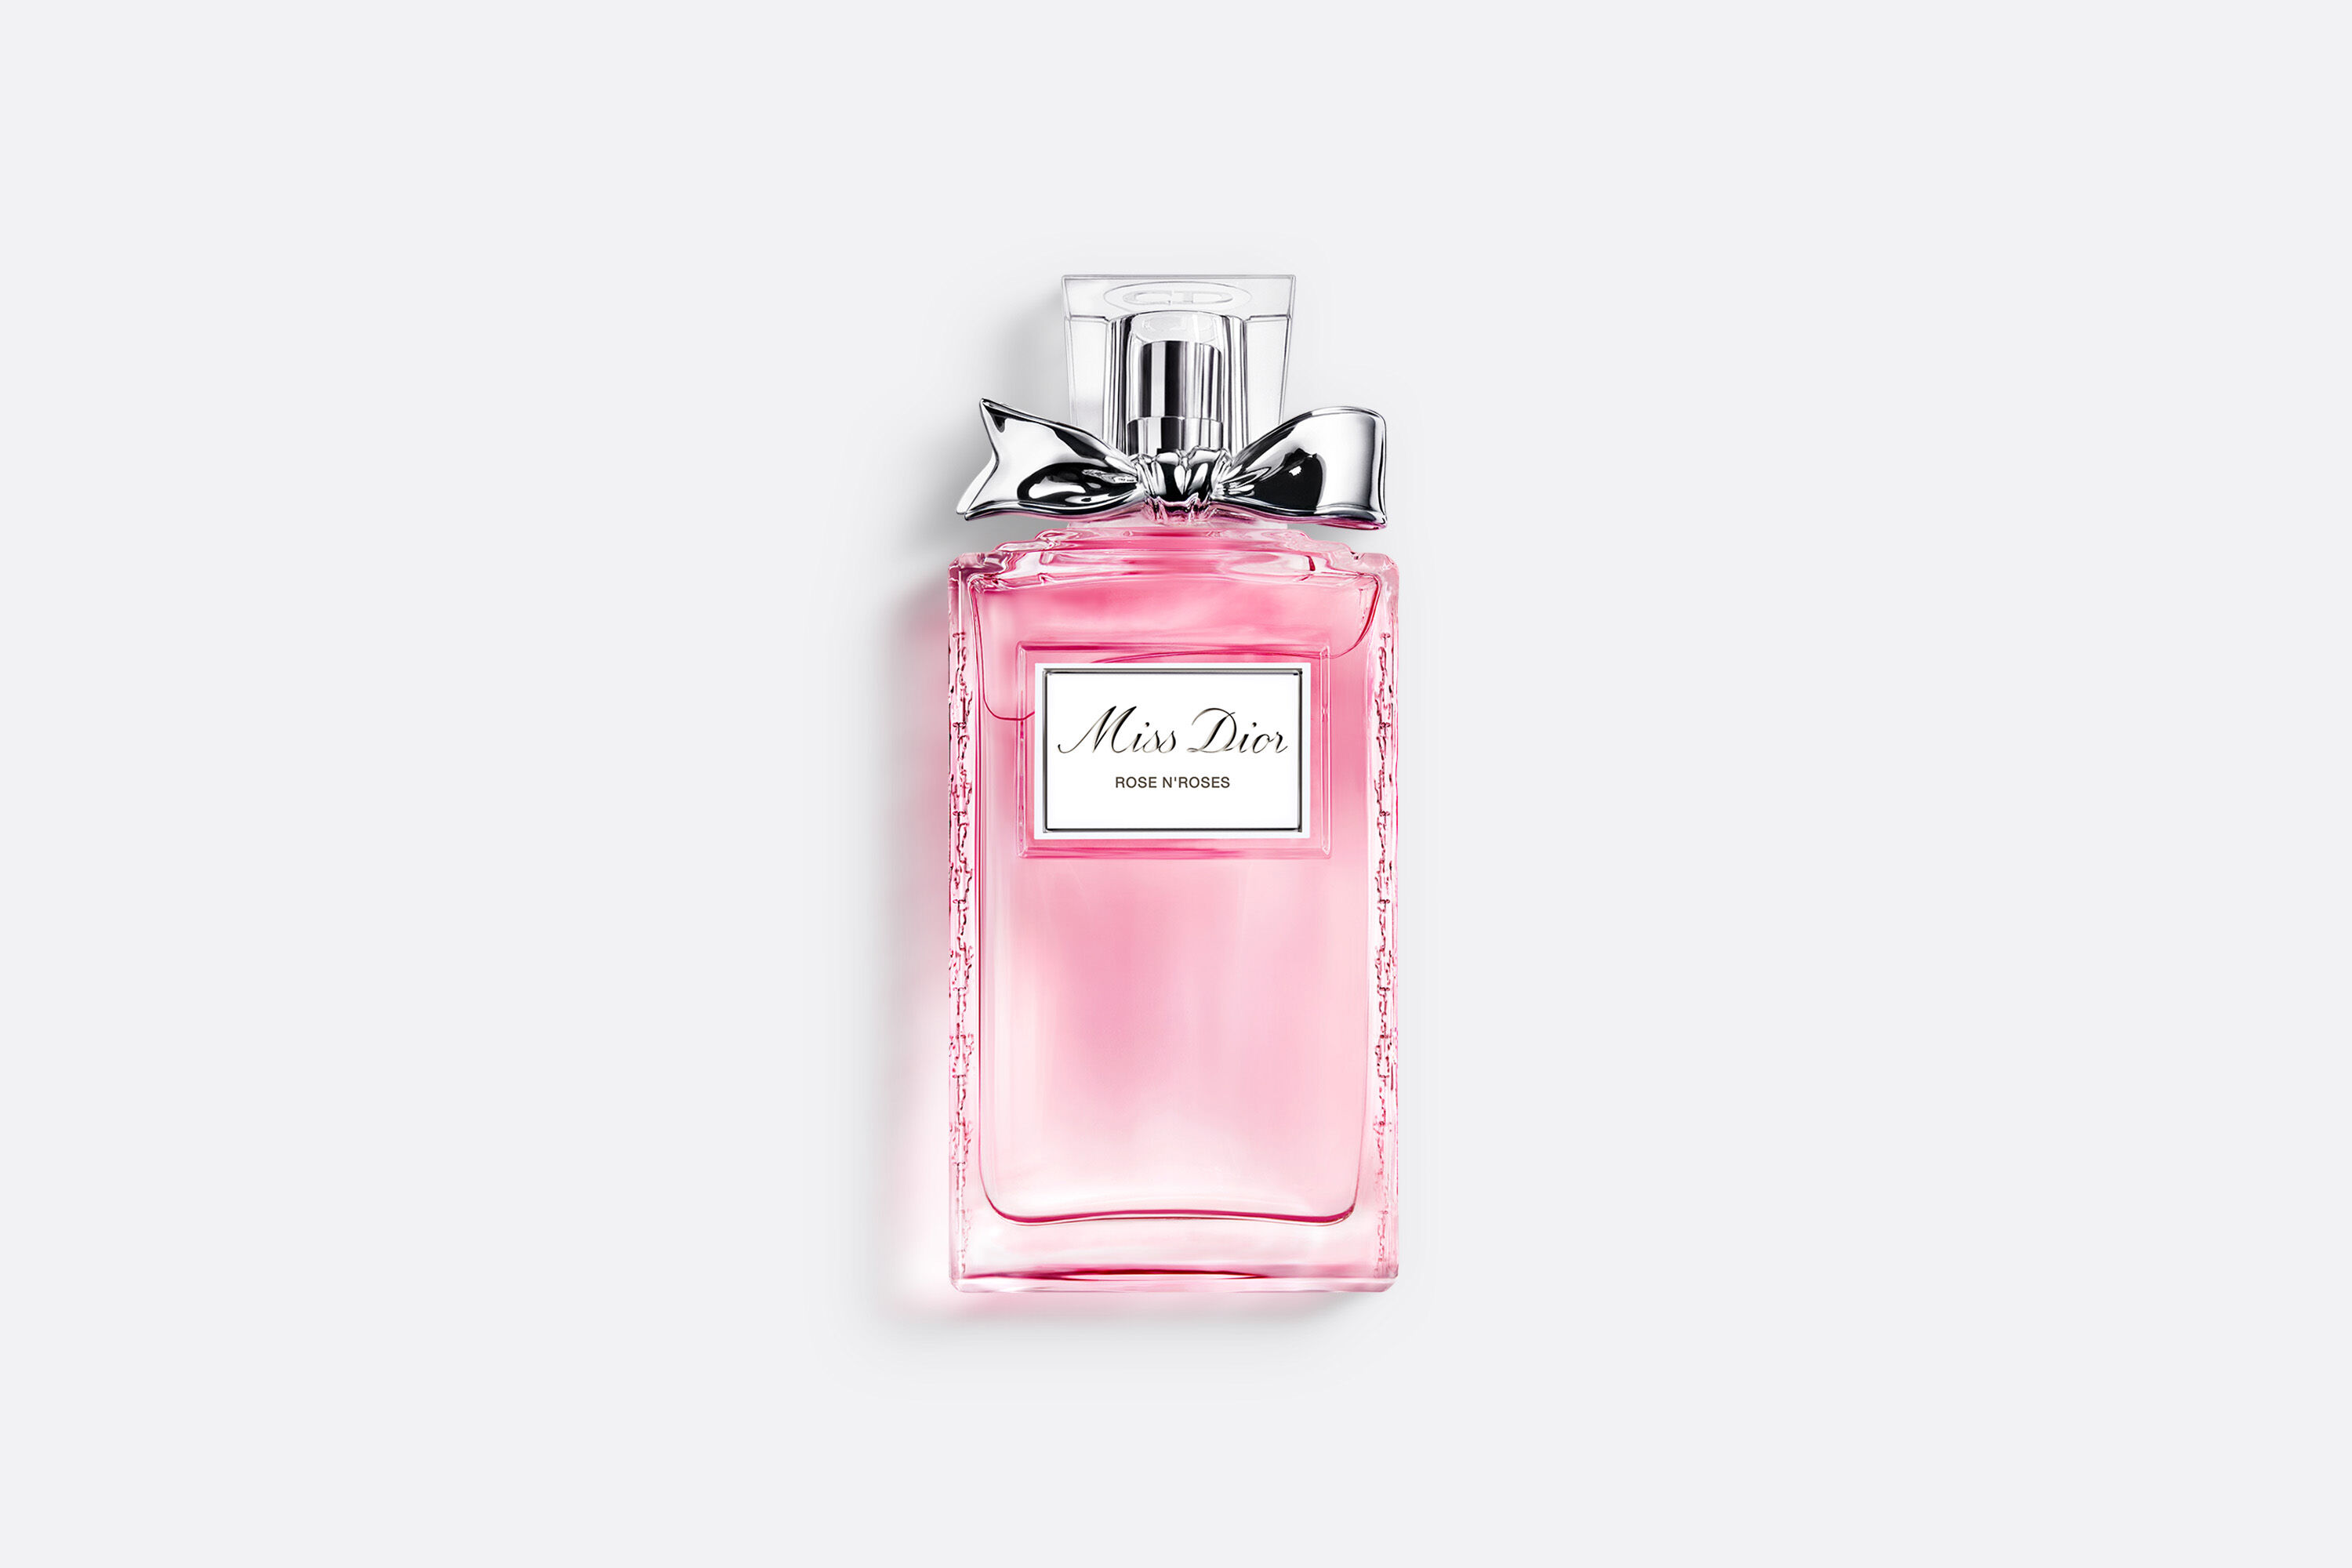 The Variance between the Christian Dior Poison fragrances